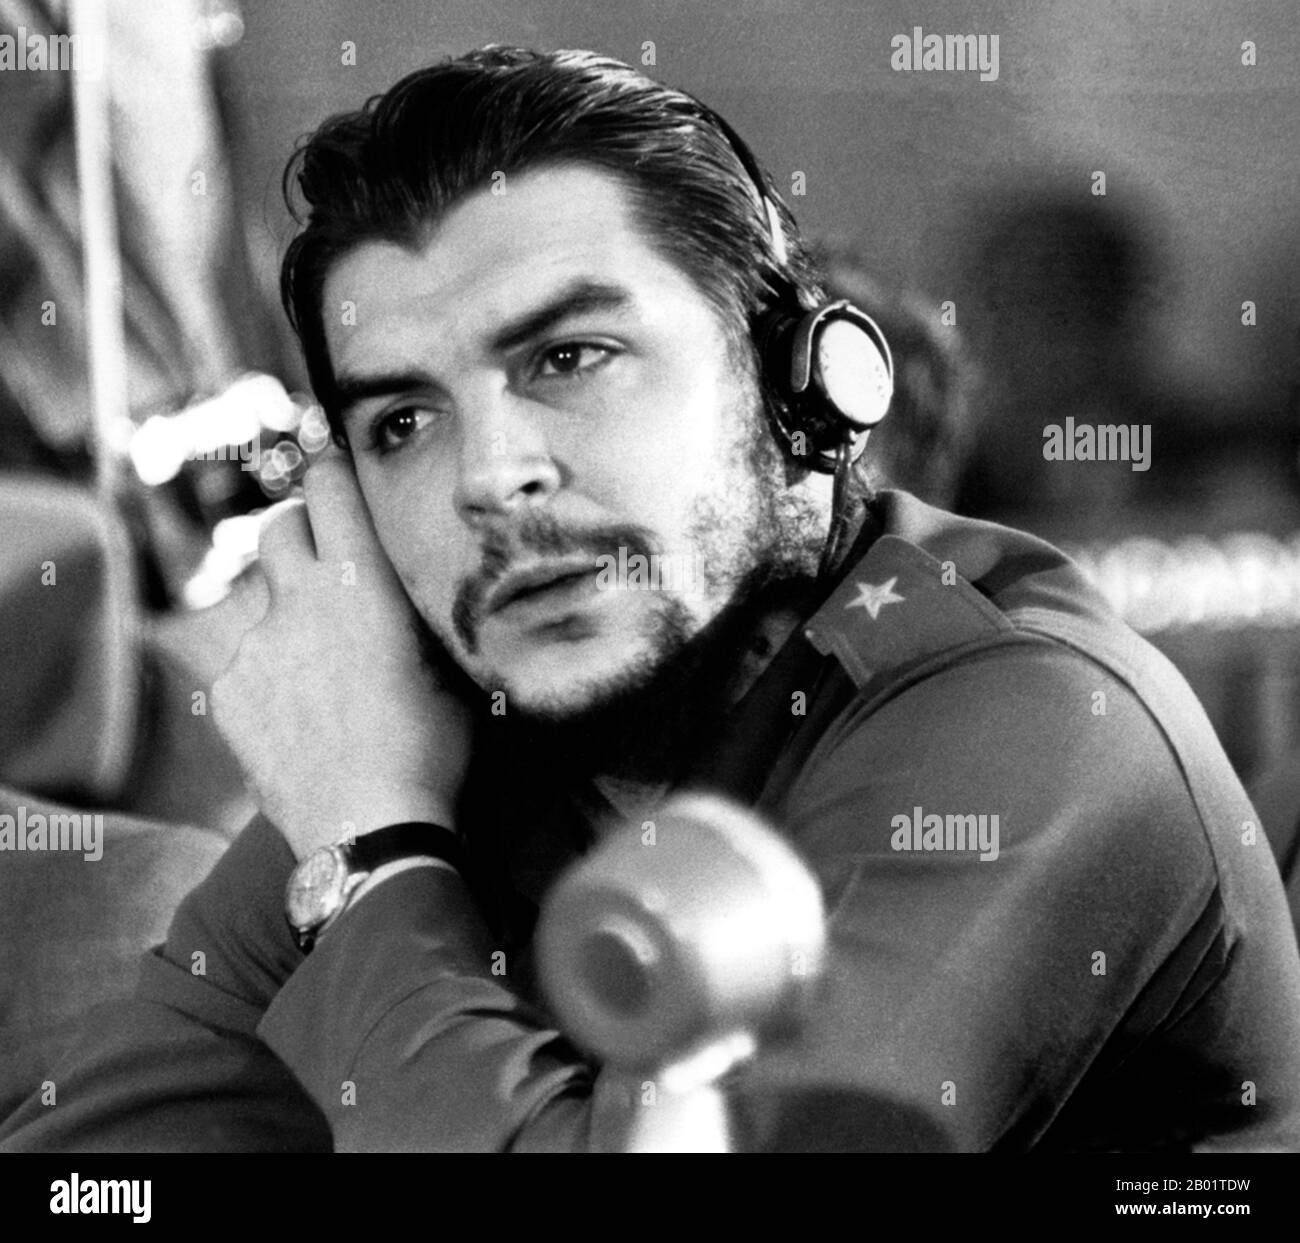 Cuba/Argentina: Ernesto 'Che' Guevara (14 June 1928 - 9 October 1967), commonly known as El Che or simply Che, Argentine Marxist revolutionary, physician, author, intellectual, guerrilla leader, diplomat and military theorist.  While living in Mexico City, Guevara met Raúl and Fidel Castro, joined their 26th of July Movement, and sailed to Cuba aboard the yacht, Granma, with the intention of overthrowing U.S.-backed Cuban dictator Fulgencio Batista. He soon rose to prominence among the insurgents, was promoted to second-in-command, and played a pivotal role in the two year guerrilla campaign. Stock Photo